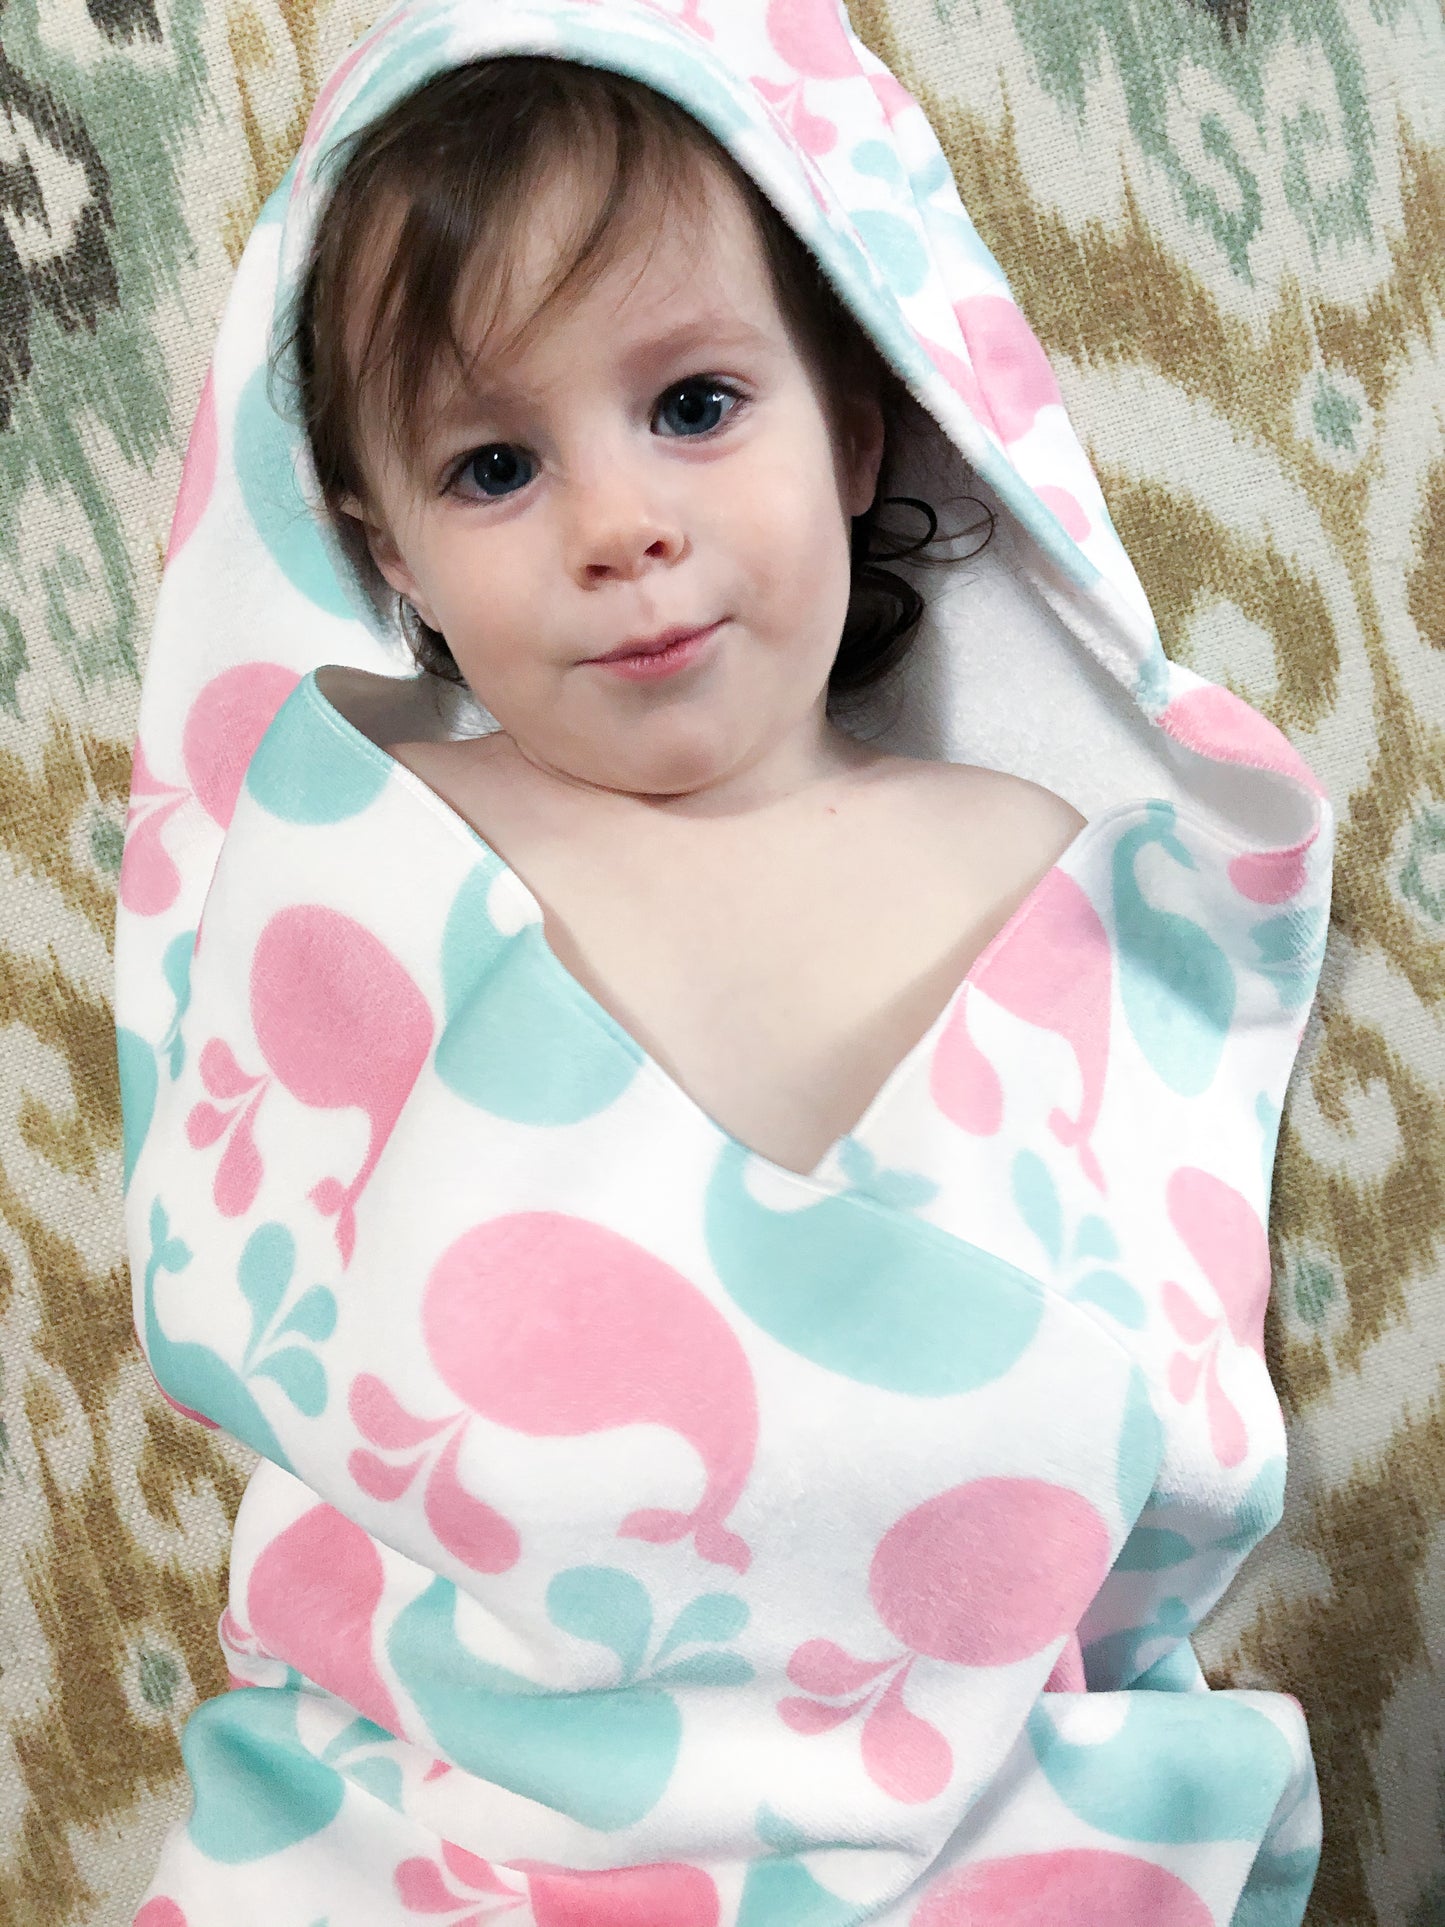 Whale of a Time Hooded Baby Bath Towel - Lindsay Ann Artistry